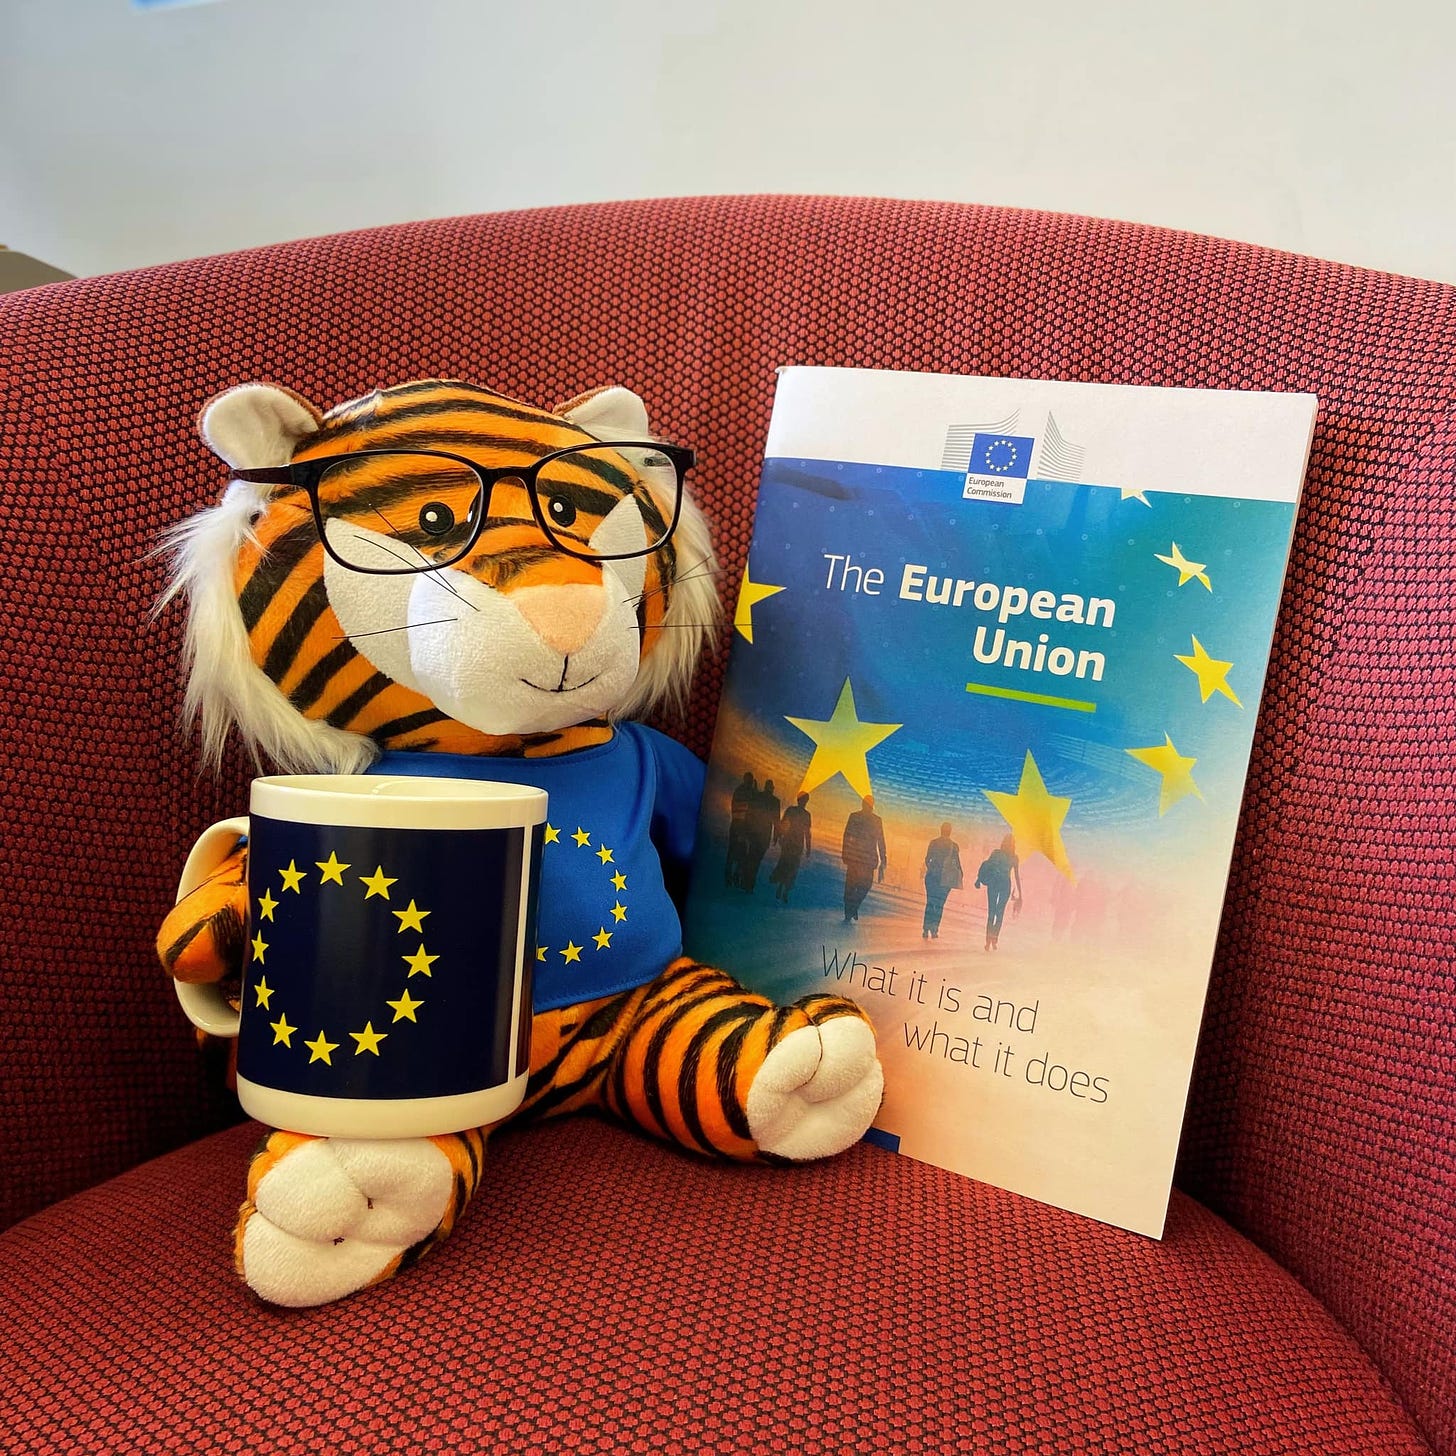 May be an image of book and text that says "The European Union itand and what it does"